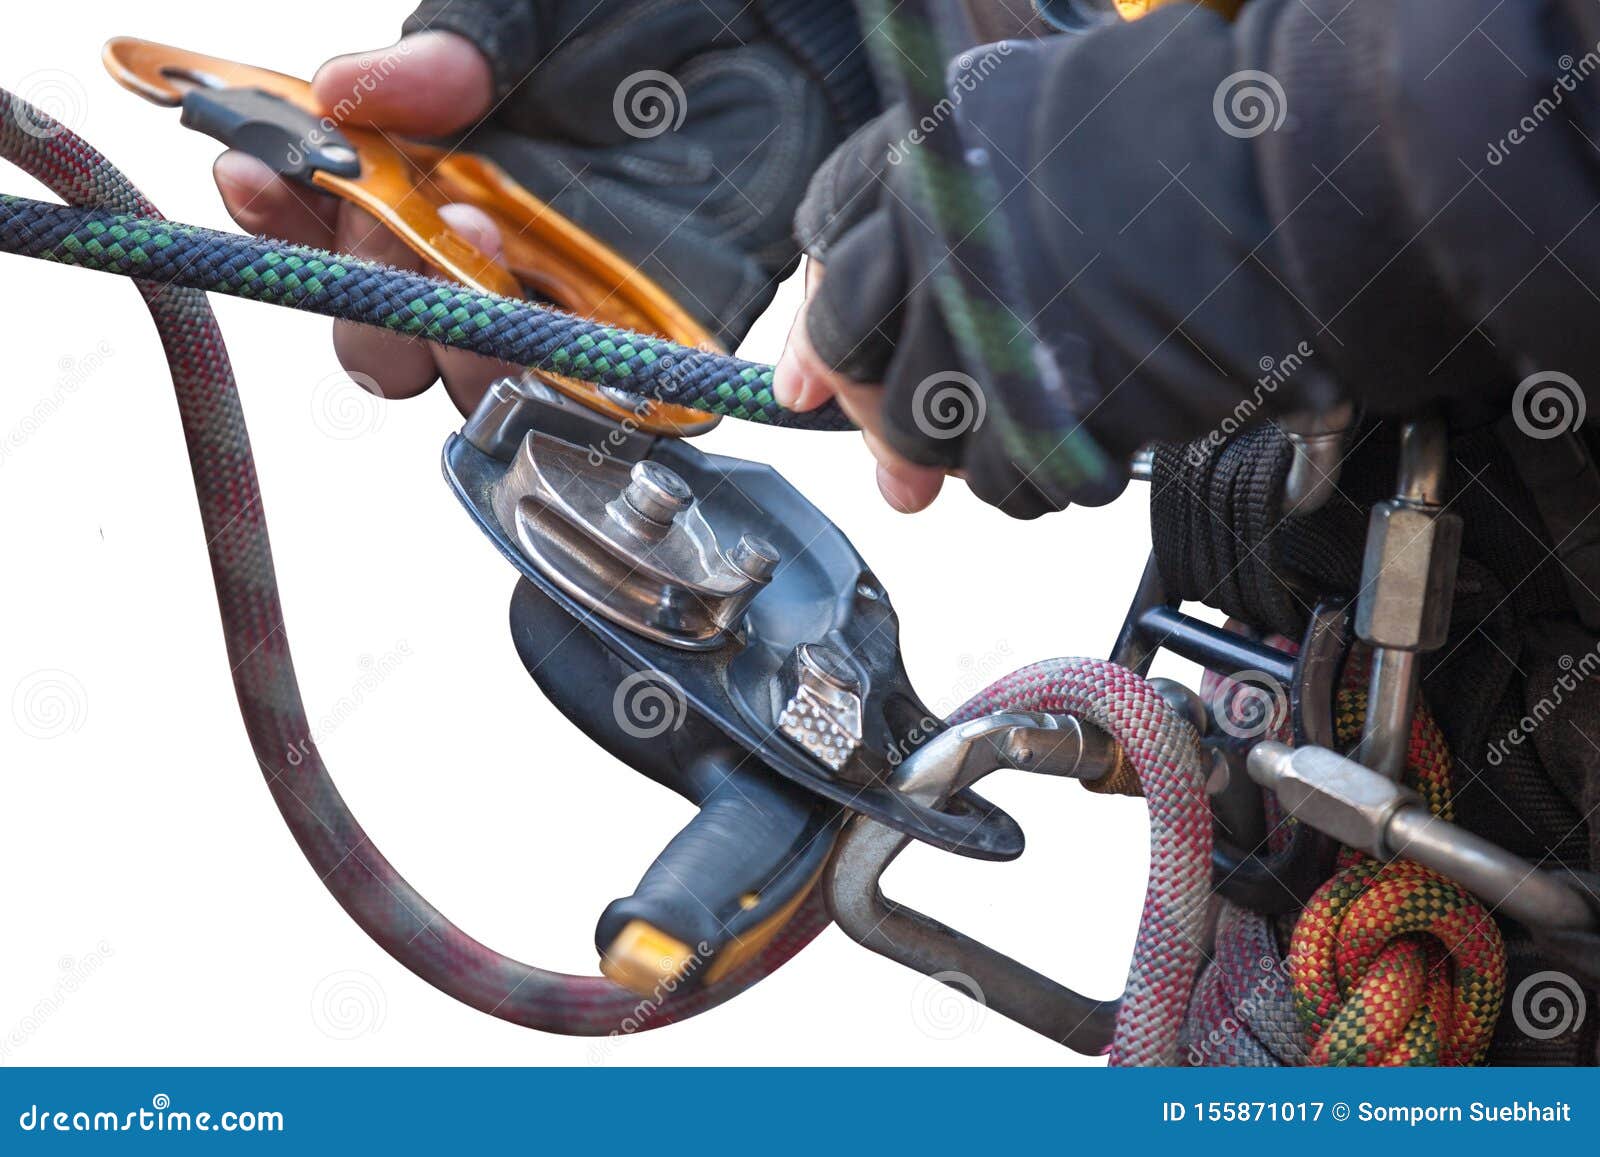 industrial rope access worker hand connecting nylon low stretch rope into descender which its attached with harness loop